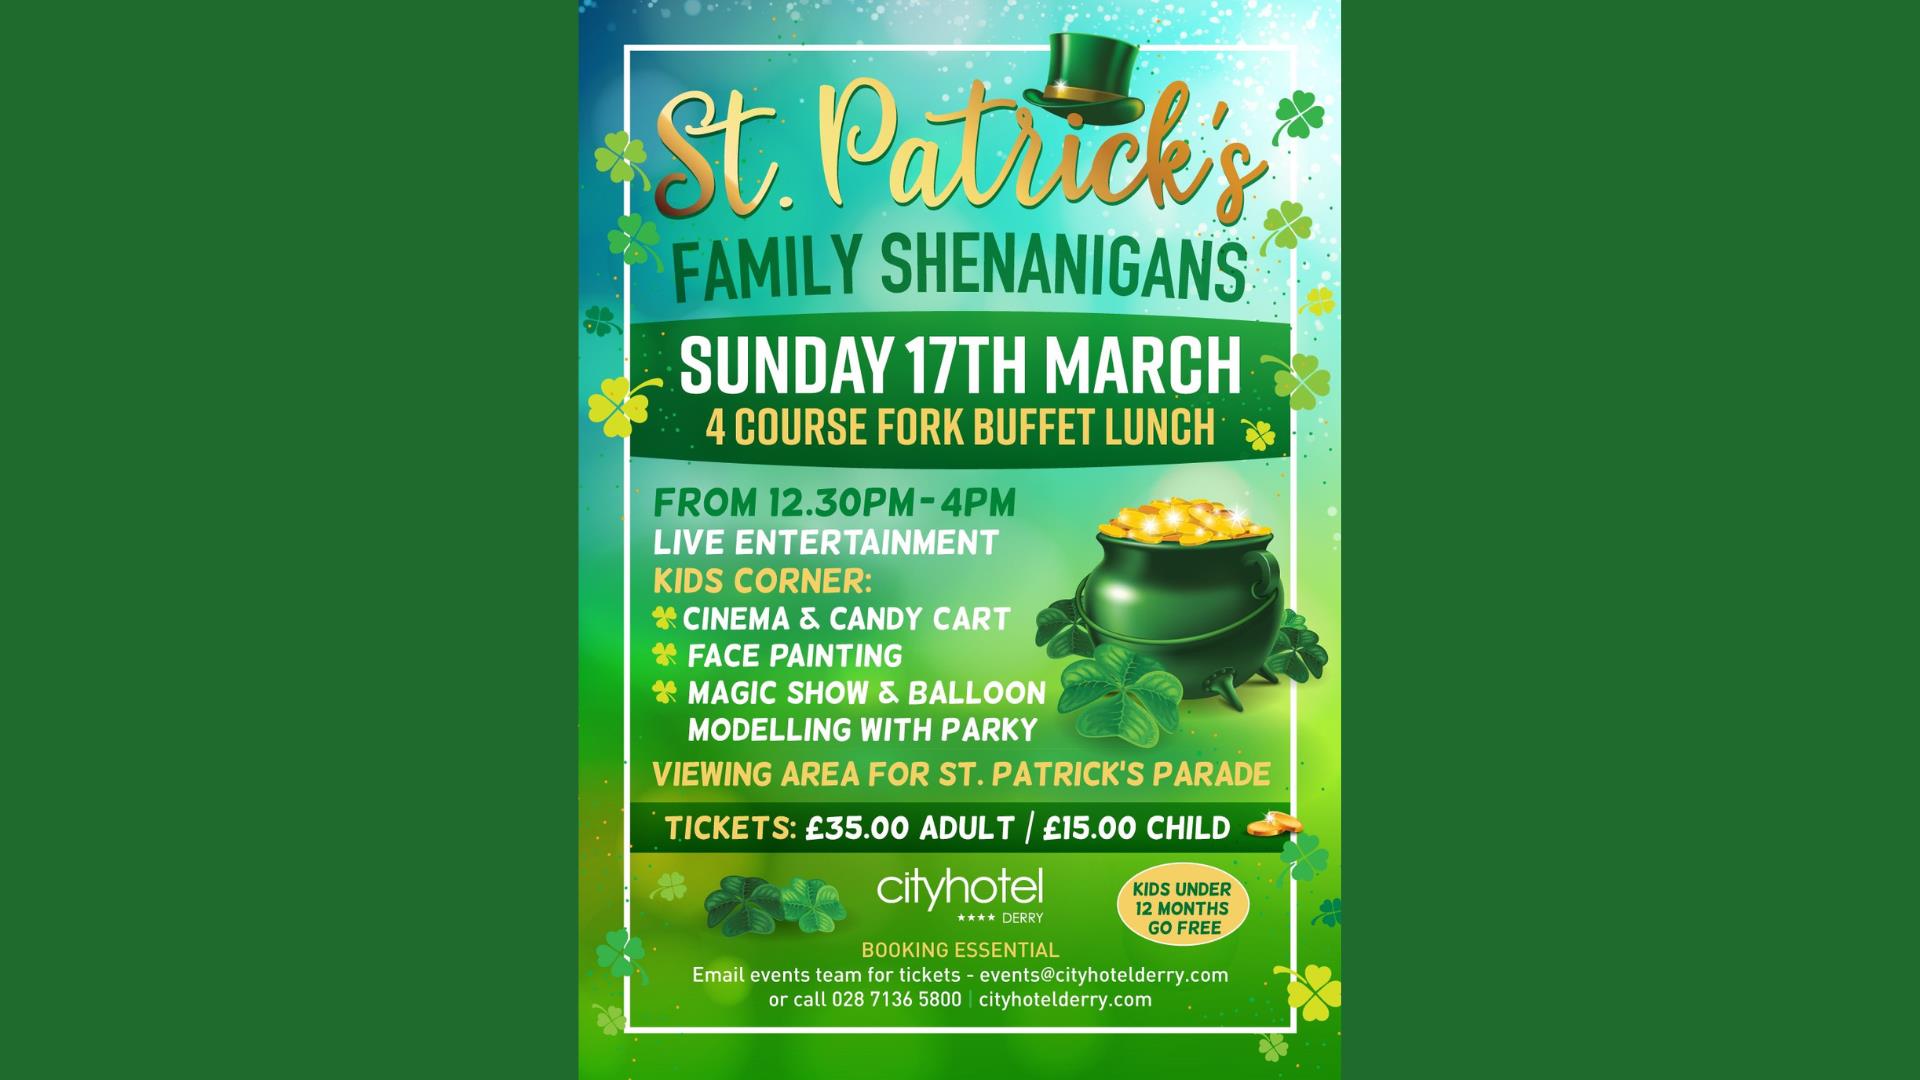 Promotional image for the St. Patrick's Day Family Shenanigans event at the City Hotel.